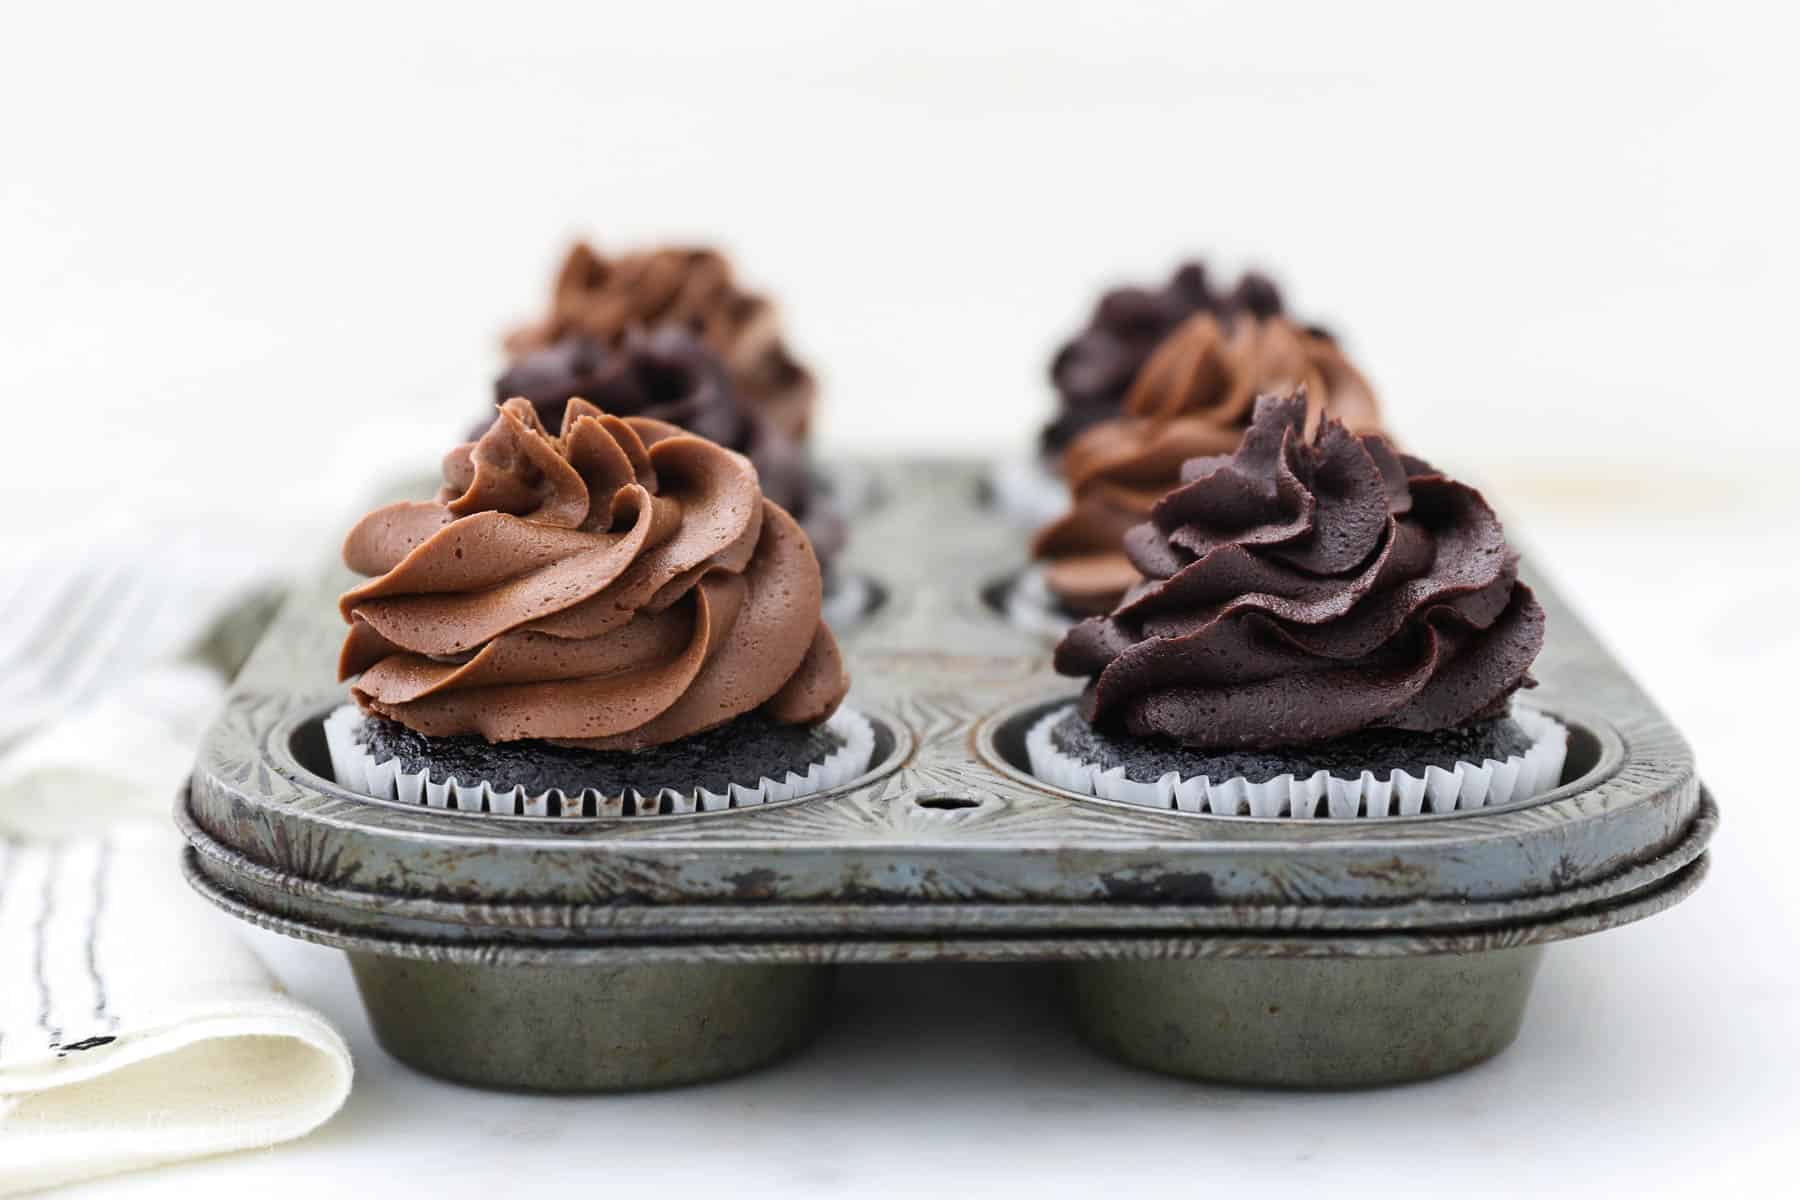 A vintage cupcake tray with frosted chocolate cupcakes